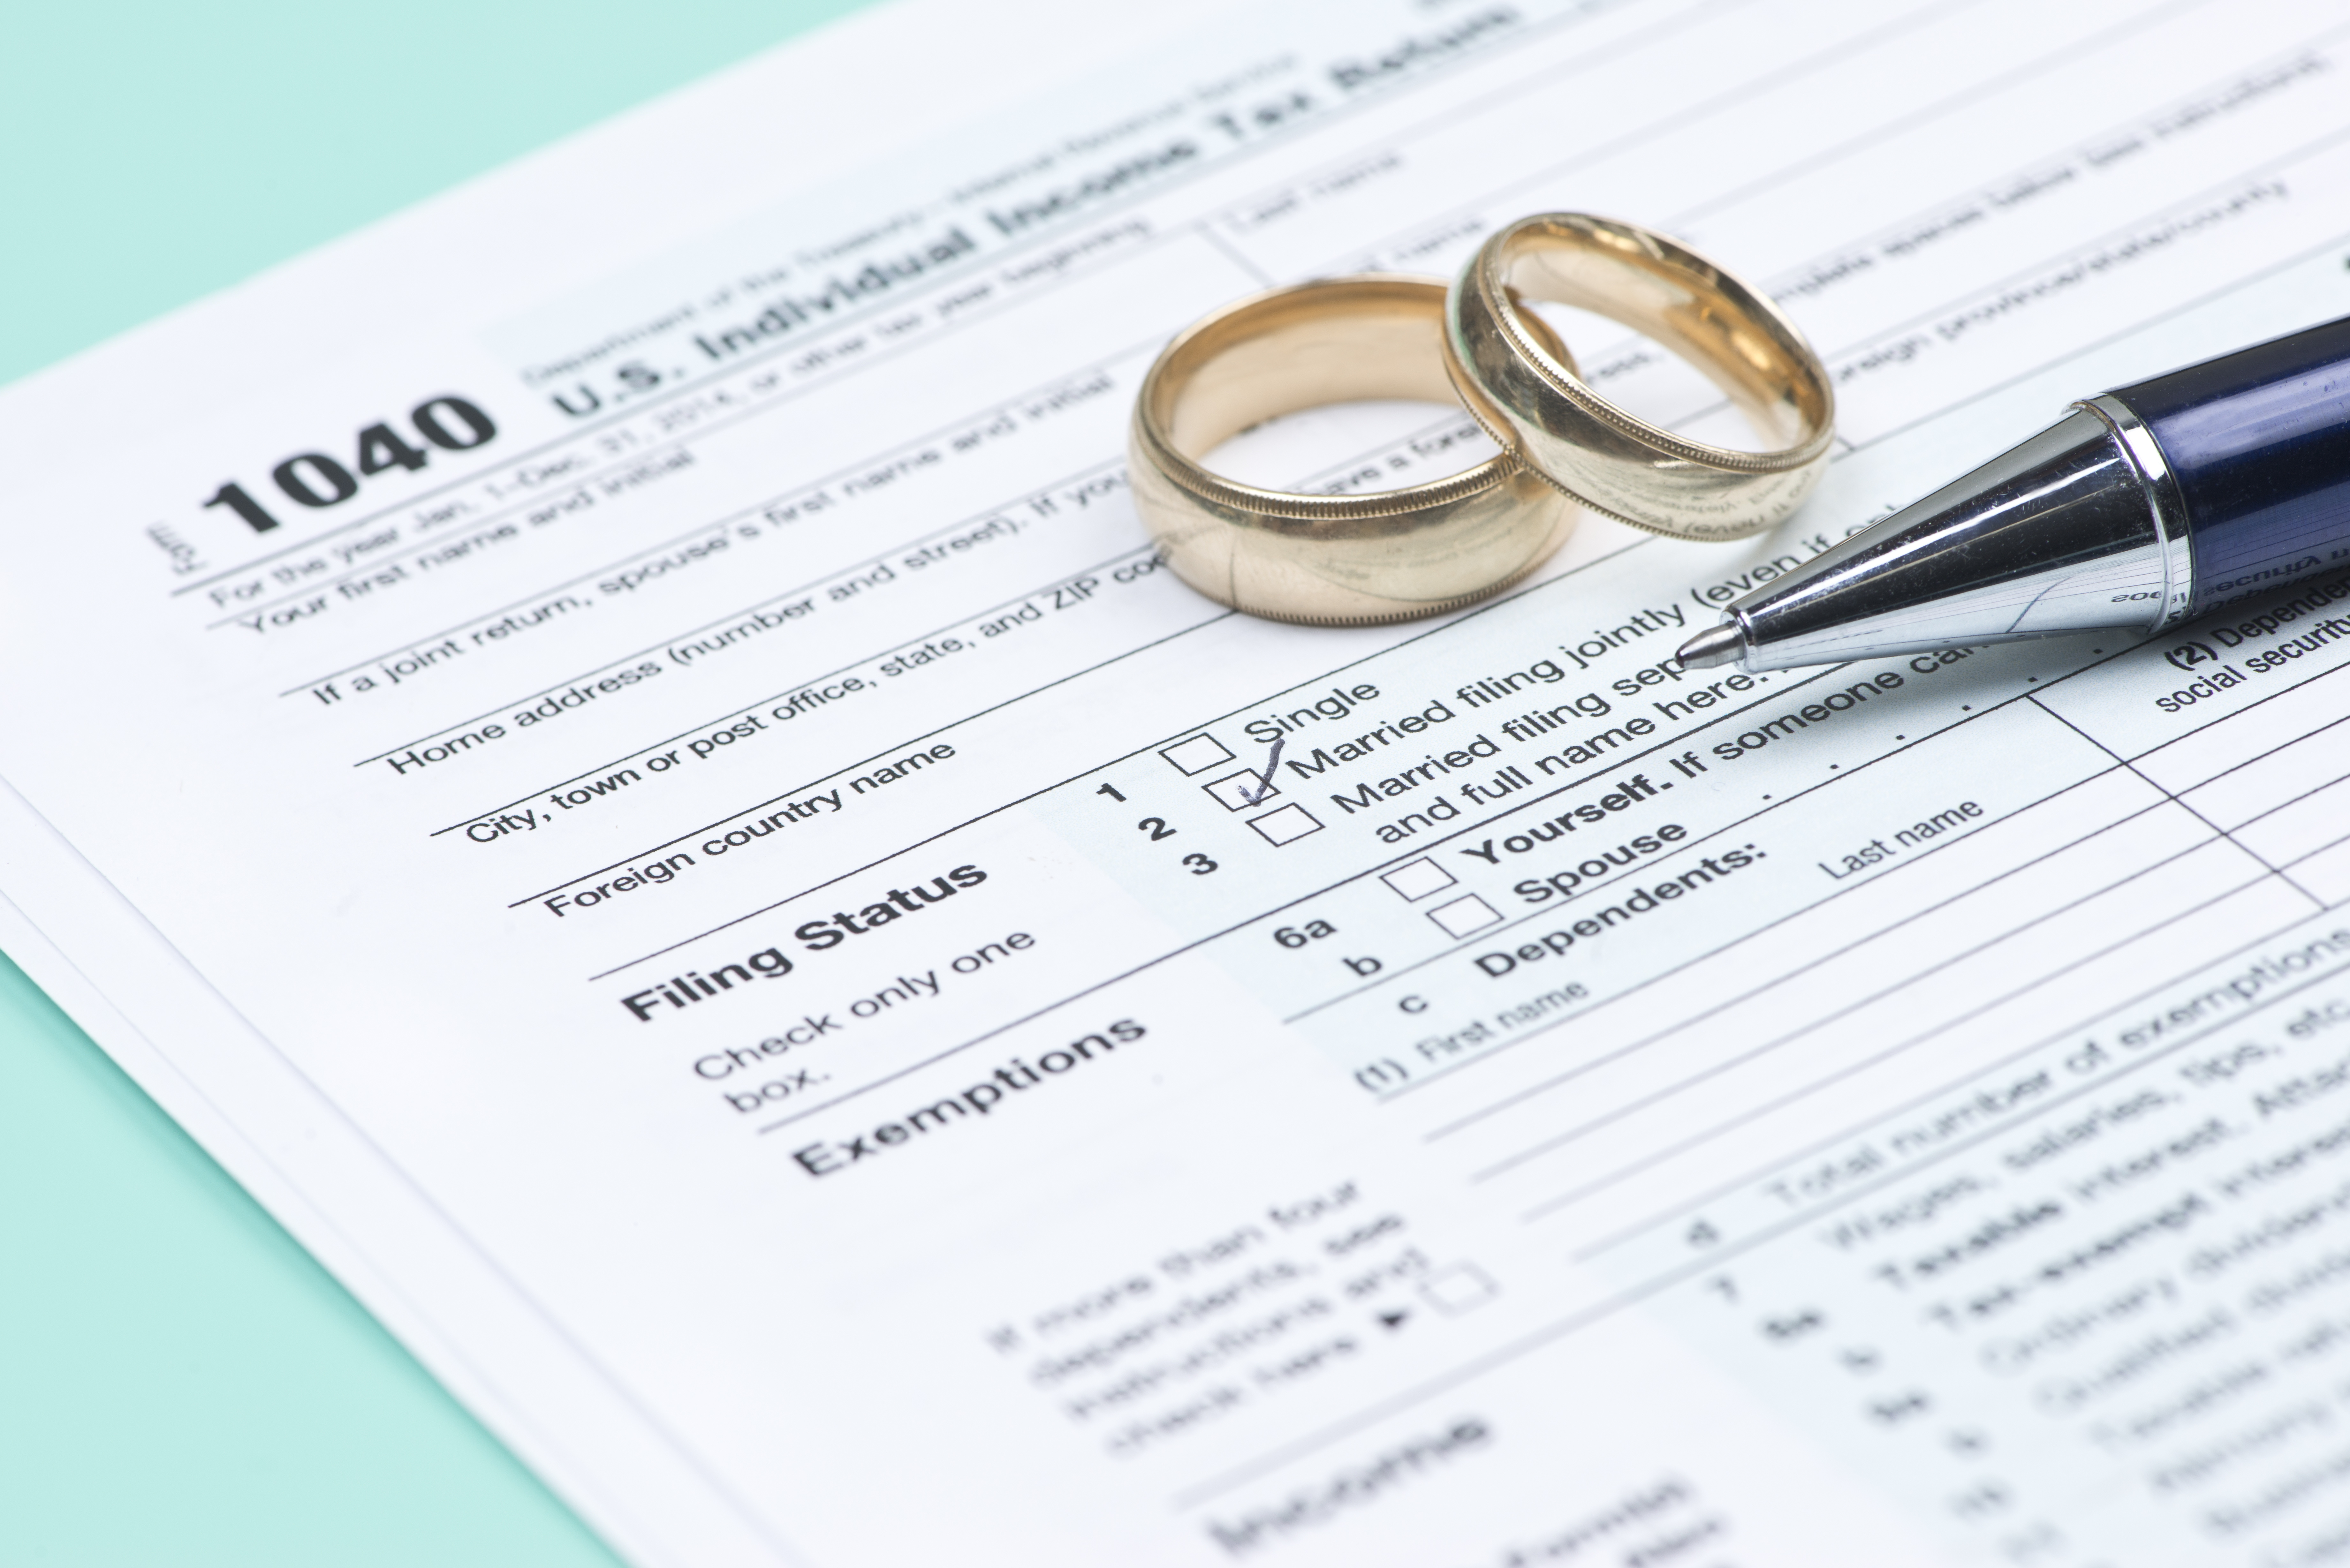 Wedding rings with United states tax form 1040 and pen.